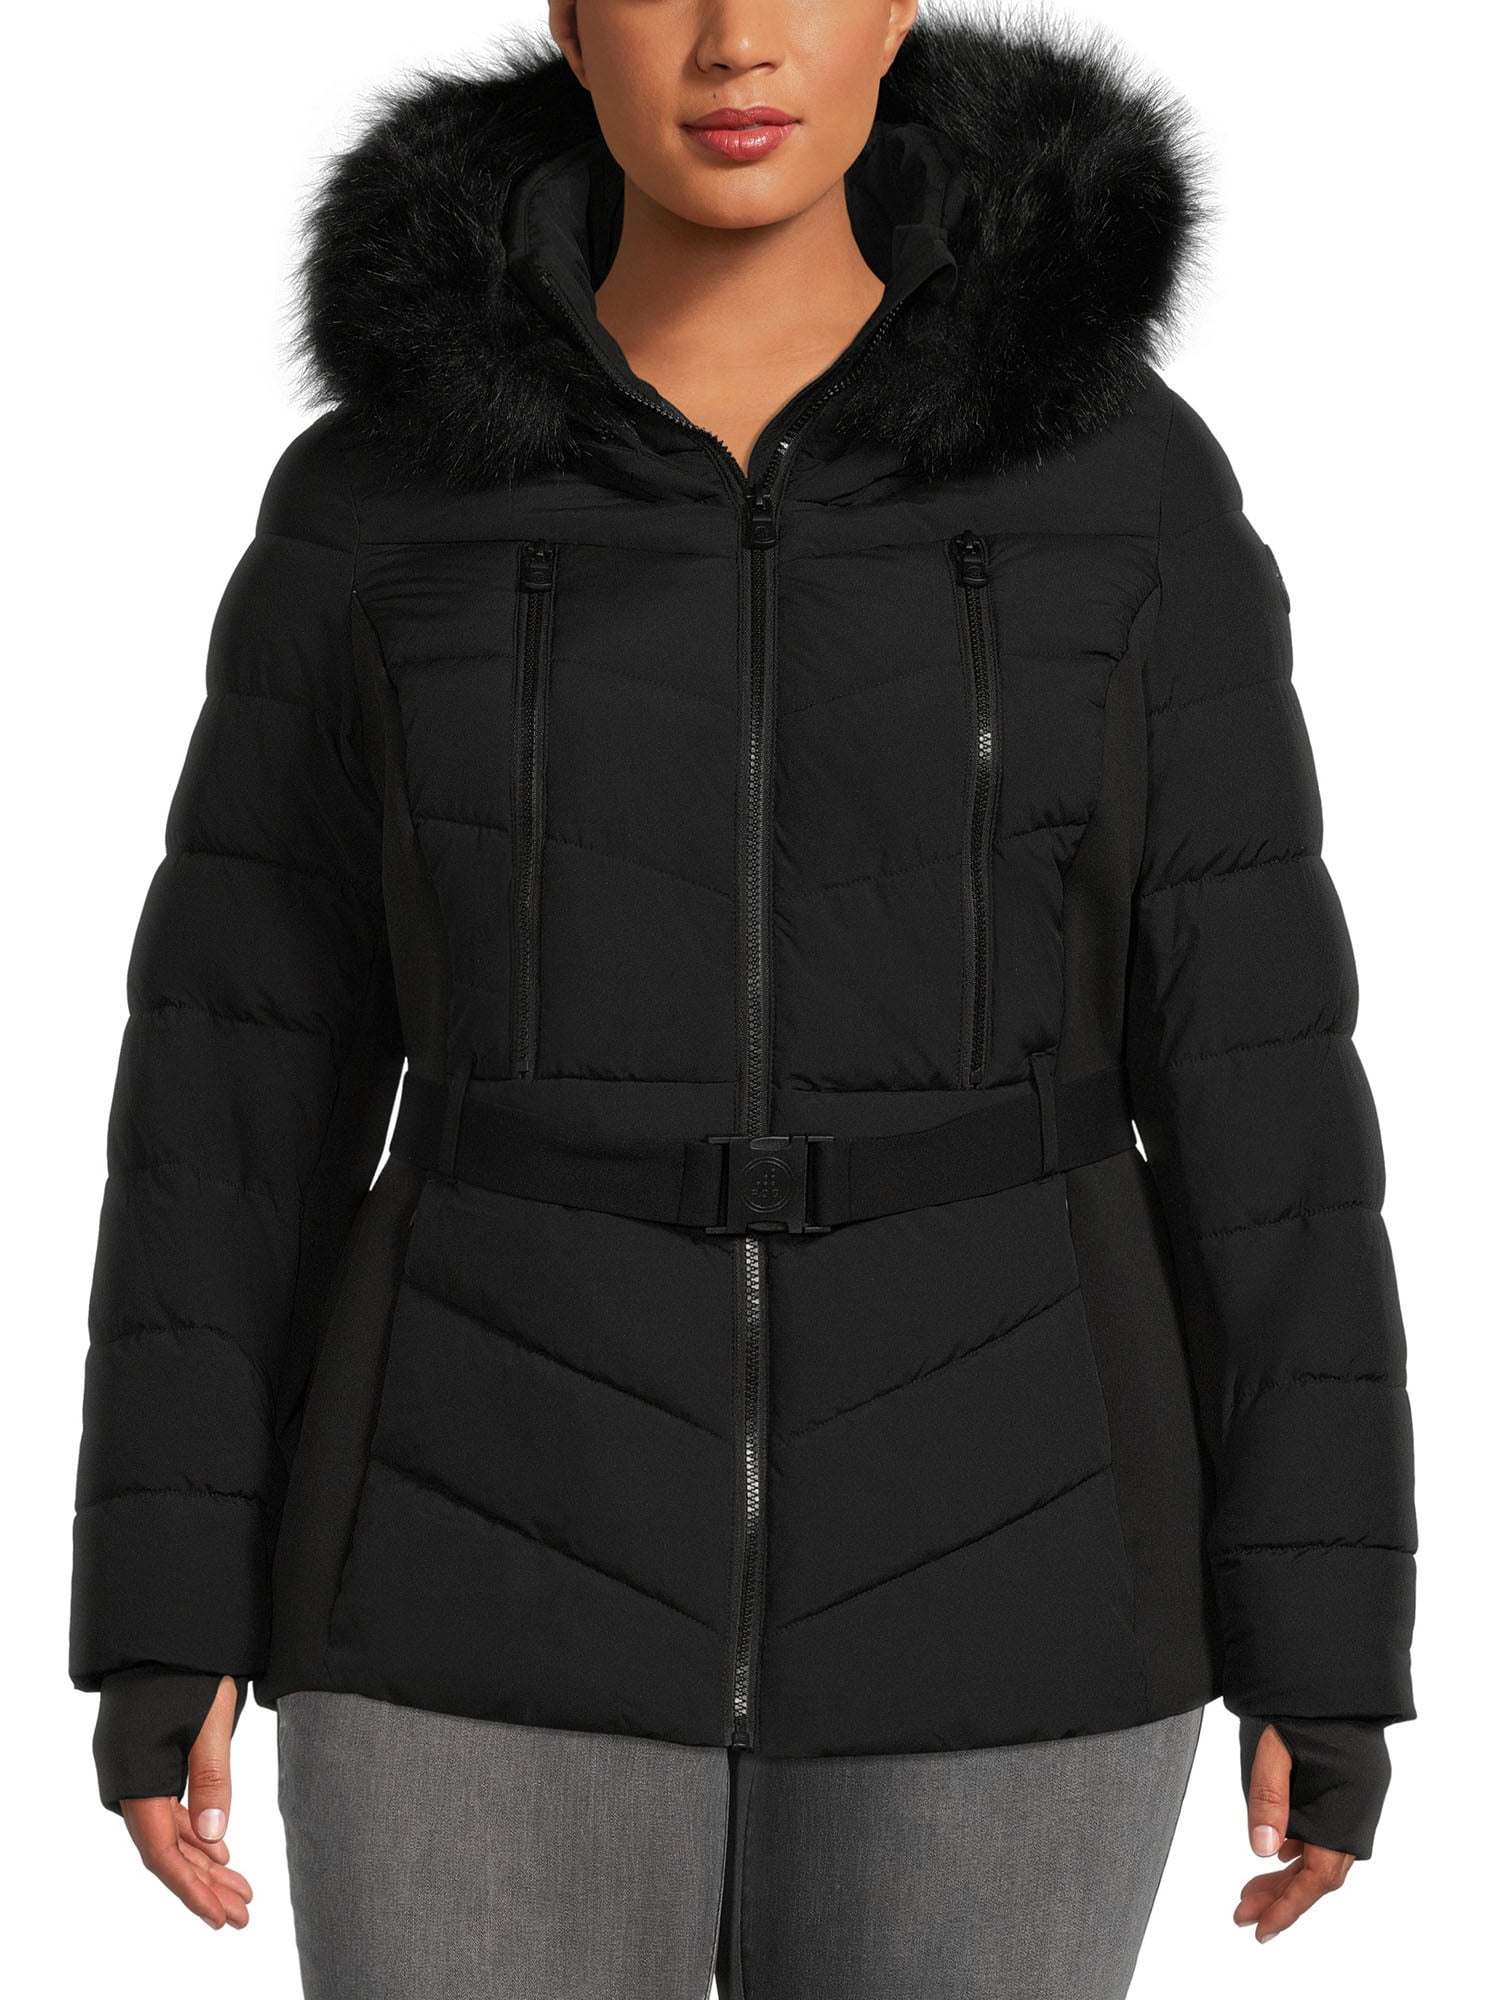 F.O.G. Women's Belted Puffer Coat with Faux Fur Hood, Sizes XS